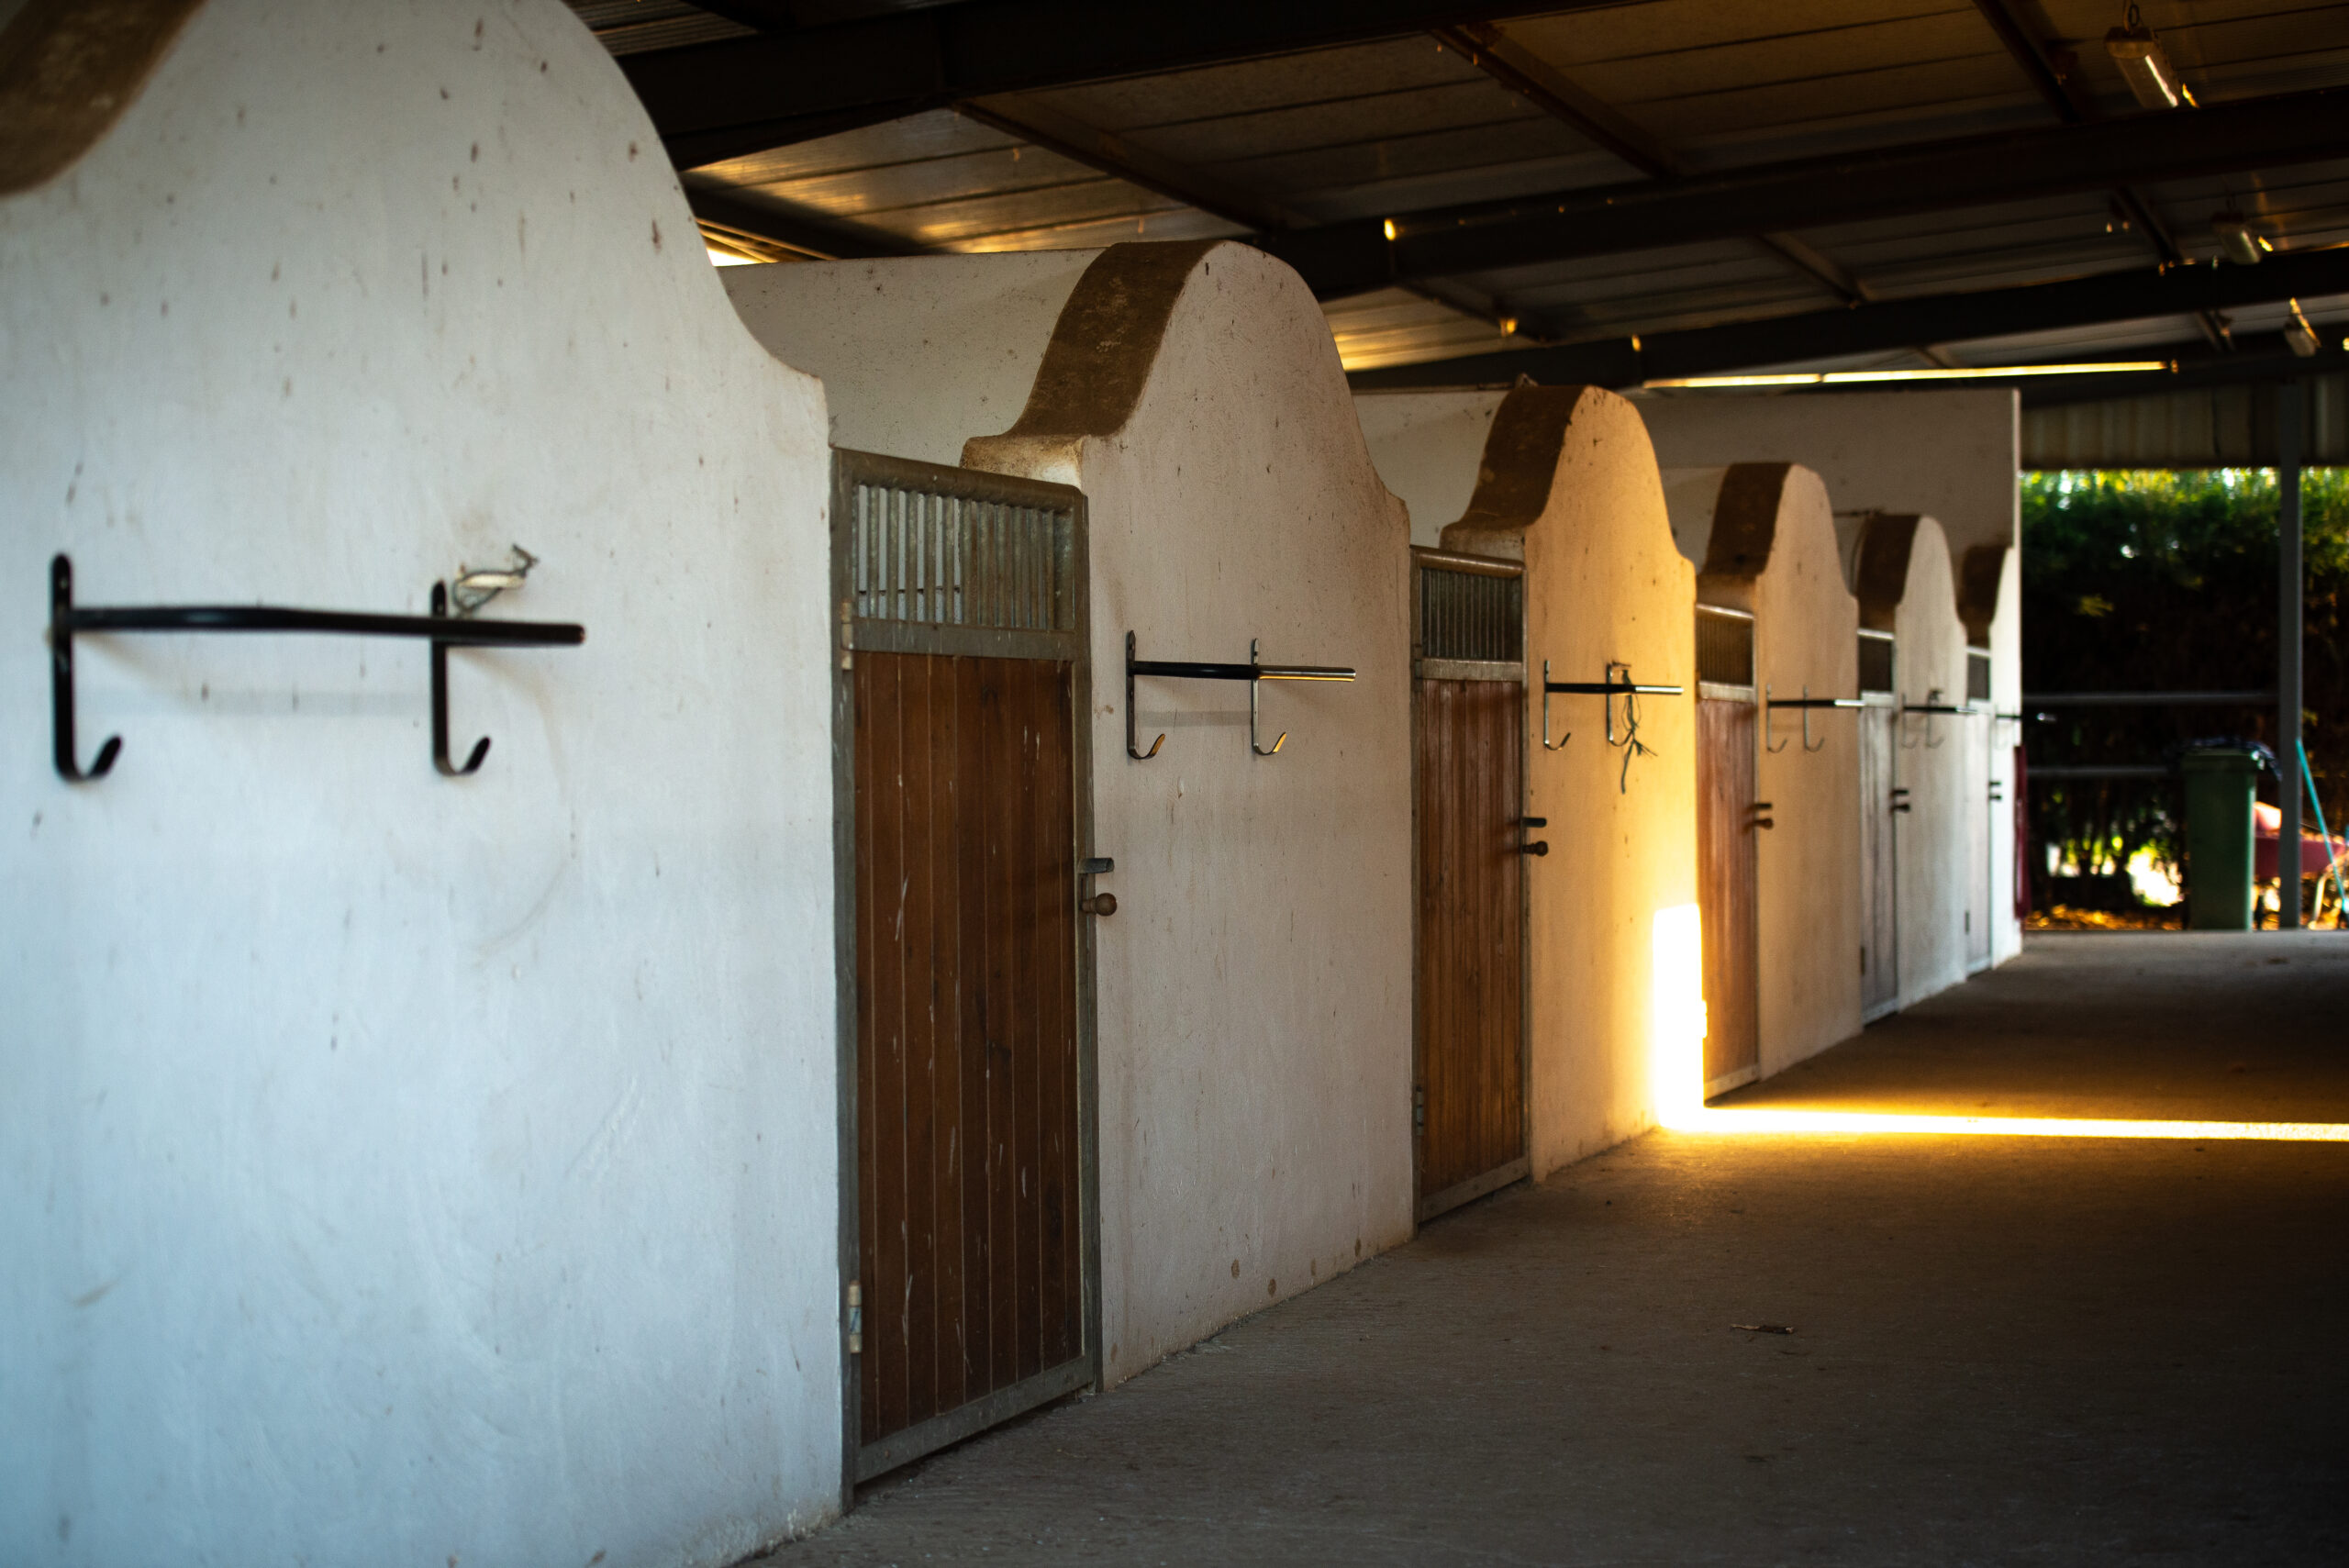 Stable alley with five horse boxes on the left in a brick built American barn in the evening light